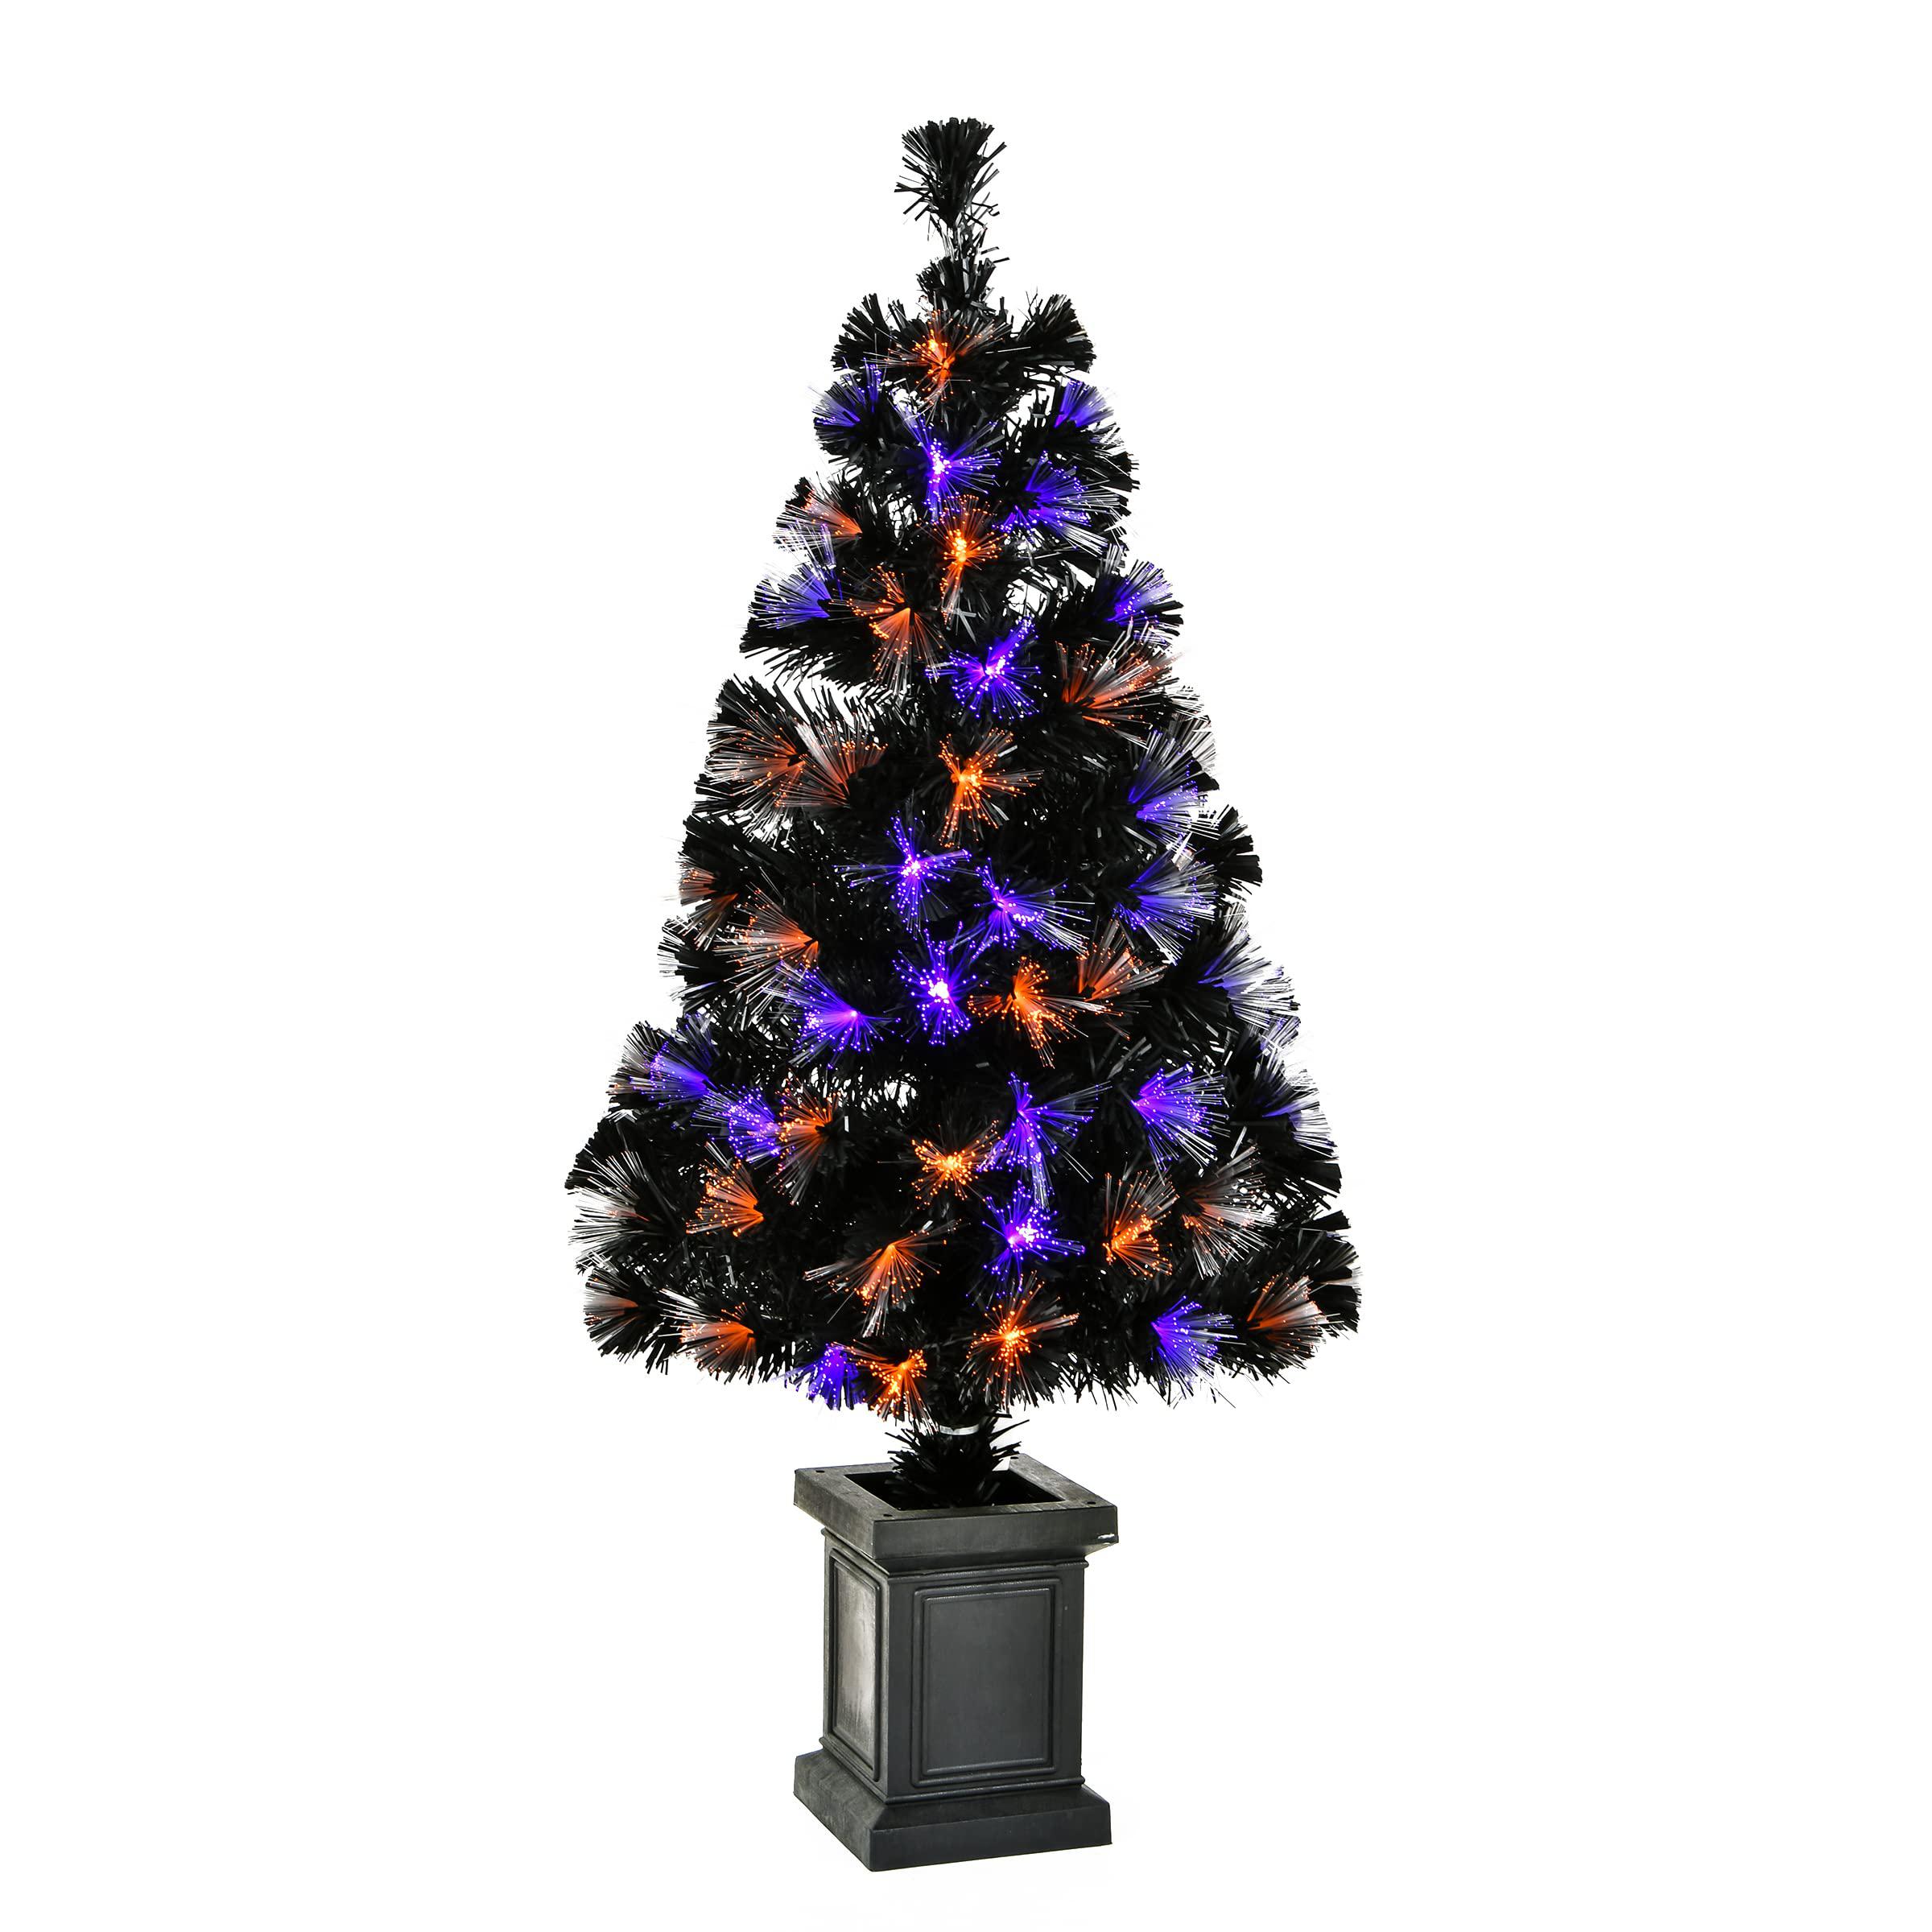 national tree company pre lit artificial tree decoration, black, fiber optic, led lights, plug in, halloween collection, 4 fe